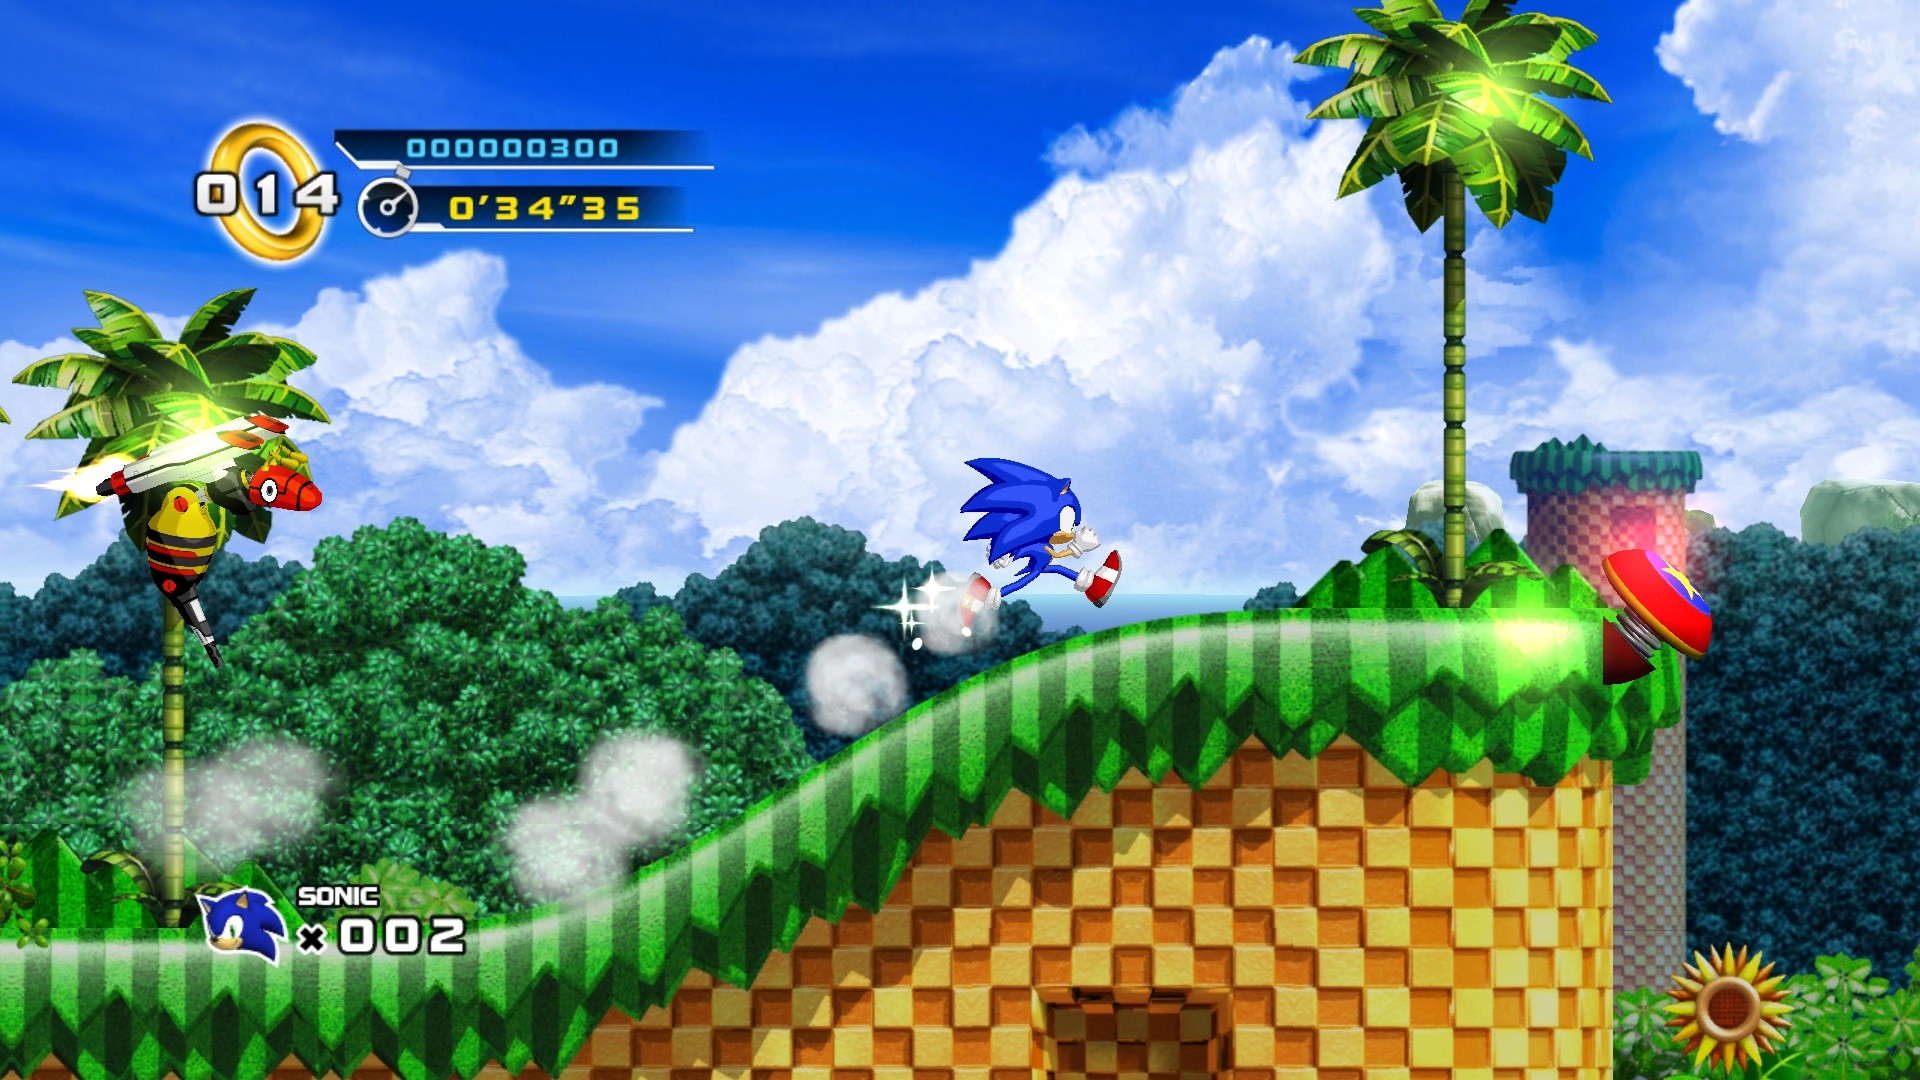 1920x1080 Sonic The Hedgehog 4: Episode I HD Wallpaper | Background Image |   | ID:509988 - Wallpaper Abyss